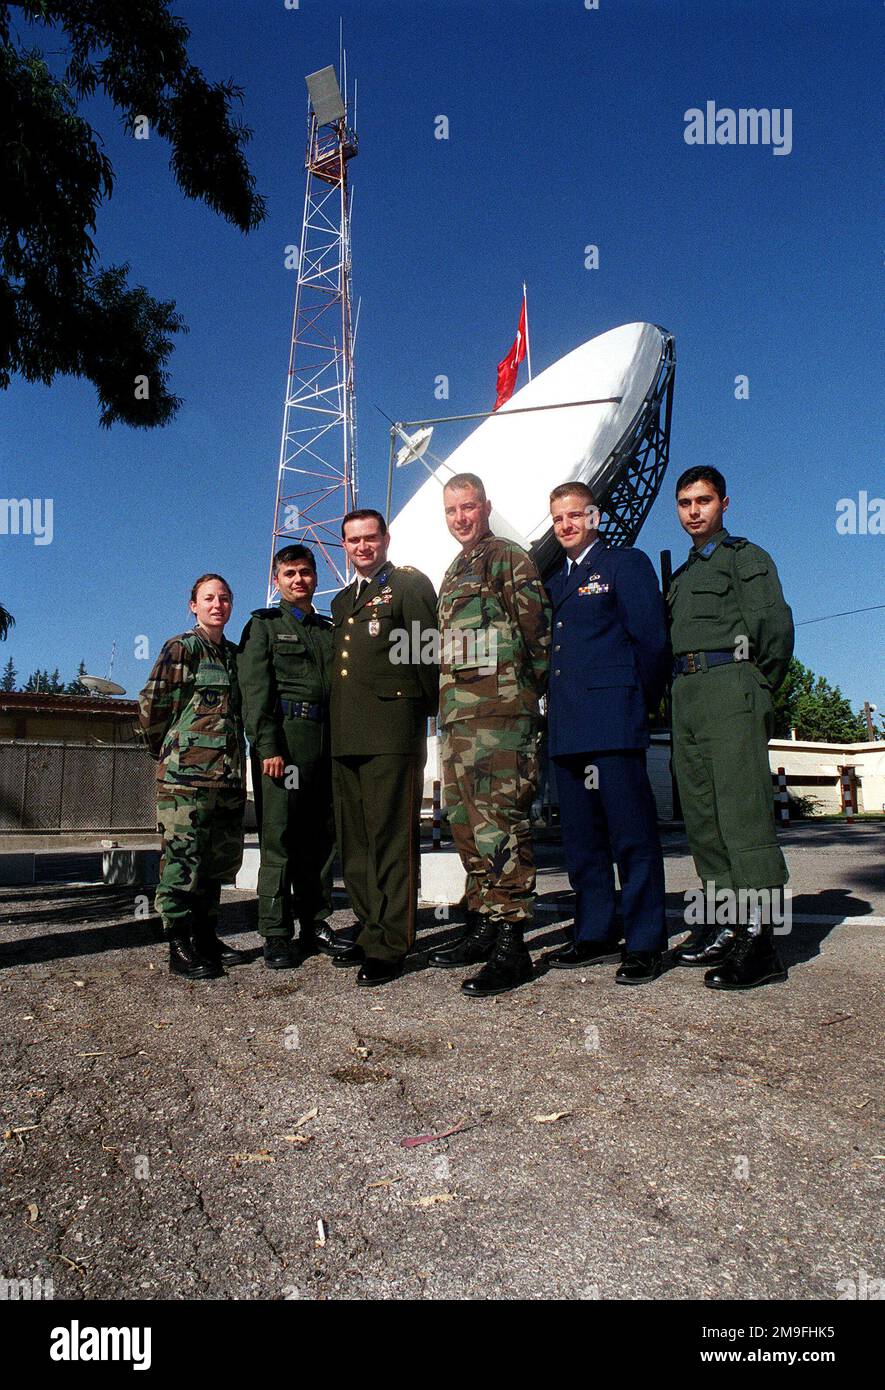 (left to right) US Air Force Captain Andrea Gormel, 39th Wing CHIEF of Military Justice, First Lieutenant Kader Sumer, Turkish Air Force Communications Squadron Commander, Captain Oktay Seyifoglu, Turkish General STAFF CHIEF Communication Electronics Information Representative, USAF Lieutenant Colonel John Nolan, 39th Communications Squadron Commander, USAF CAPT Don Carter, Communications officer and interpreter with the Office of Defense Cooperation in Ankara, and 1LT Birol Guvenc, Turkish Air Force Communications Squadron Division Commander, pose for a group photo during the Defense and Econ Stock Photo